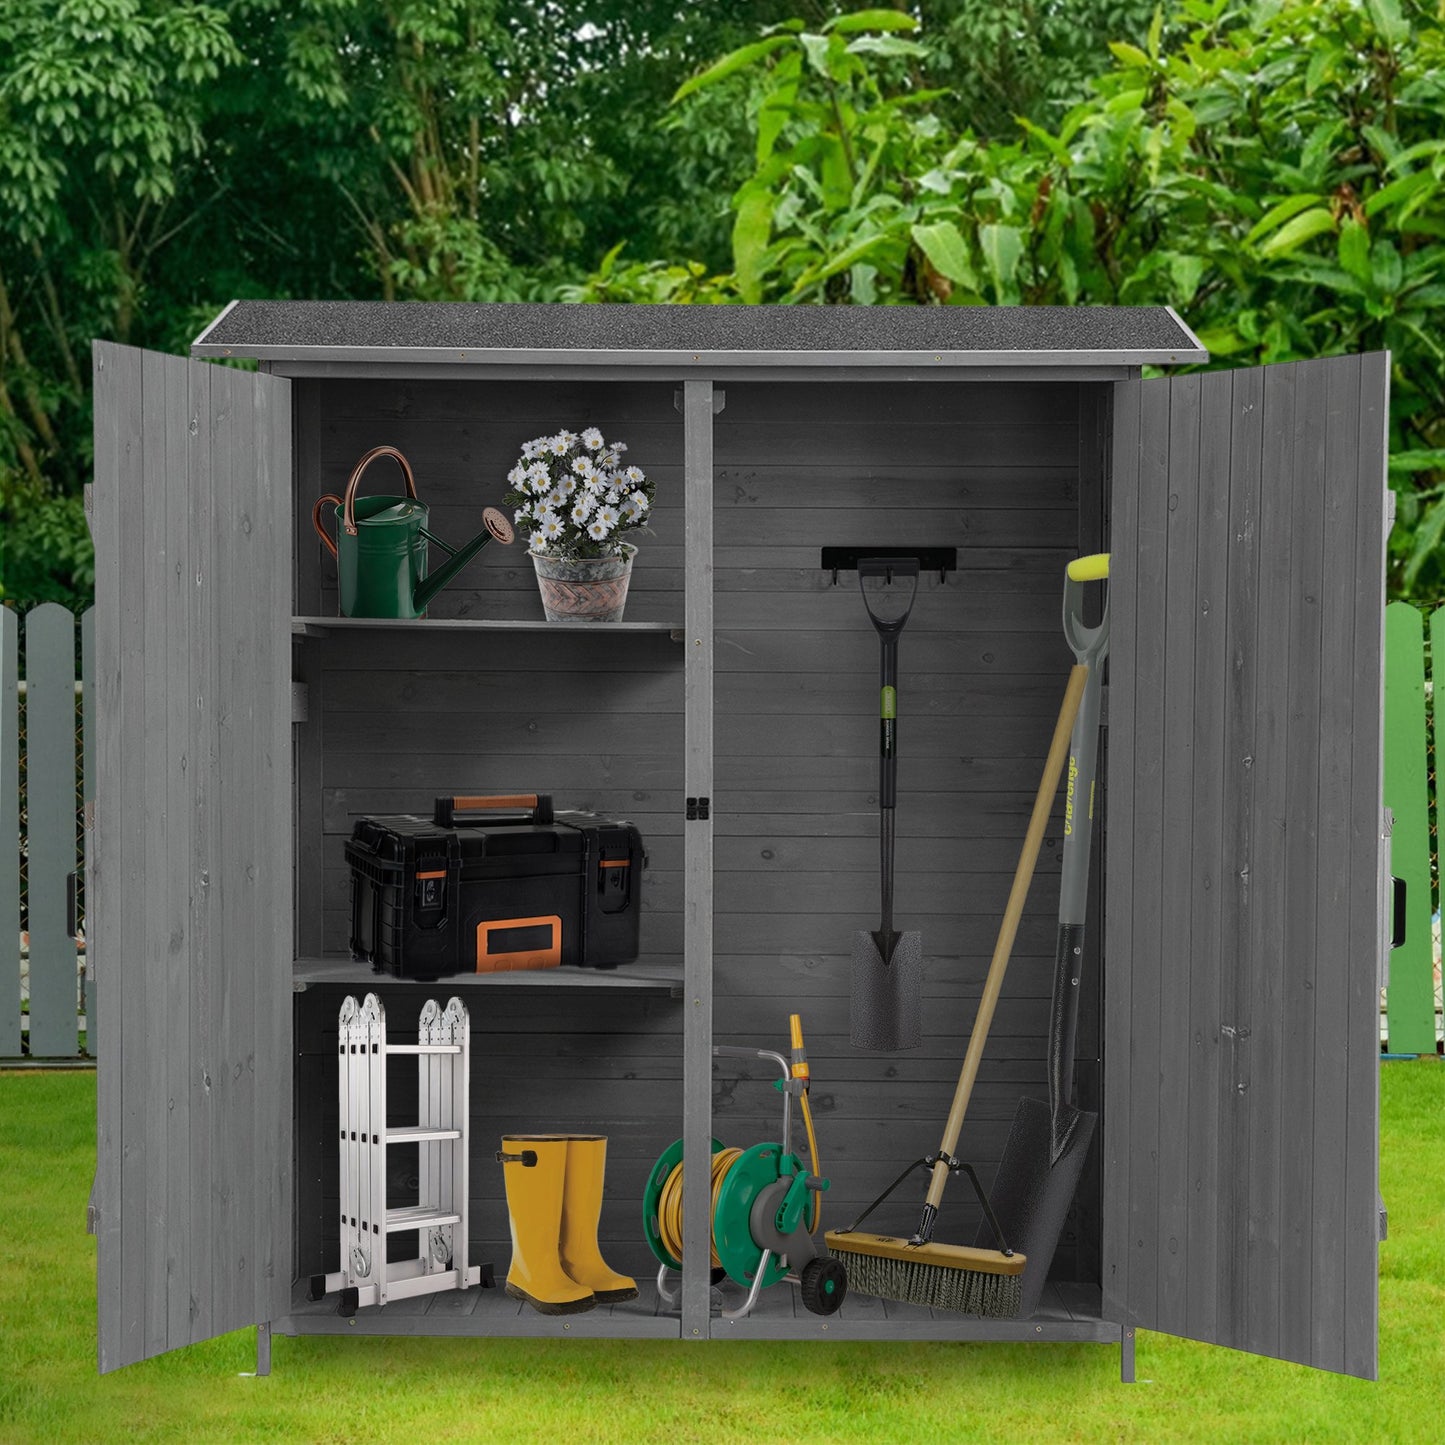 CASEMIOL Patio Storage Shed with Detachable Shelves and Hooks, Outdoor Wood Shed with Waterproof Pitch Roof, Backyard Shed with Lockable Door, Bike Shed, Garden Shed, Tool Shed, Metal Shed, Gray